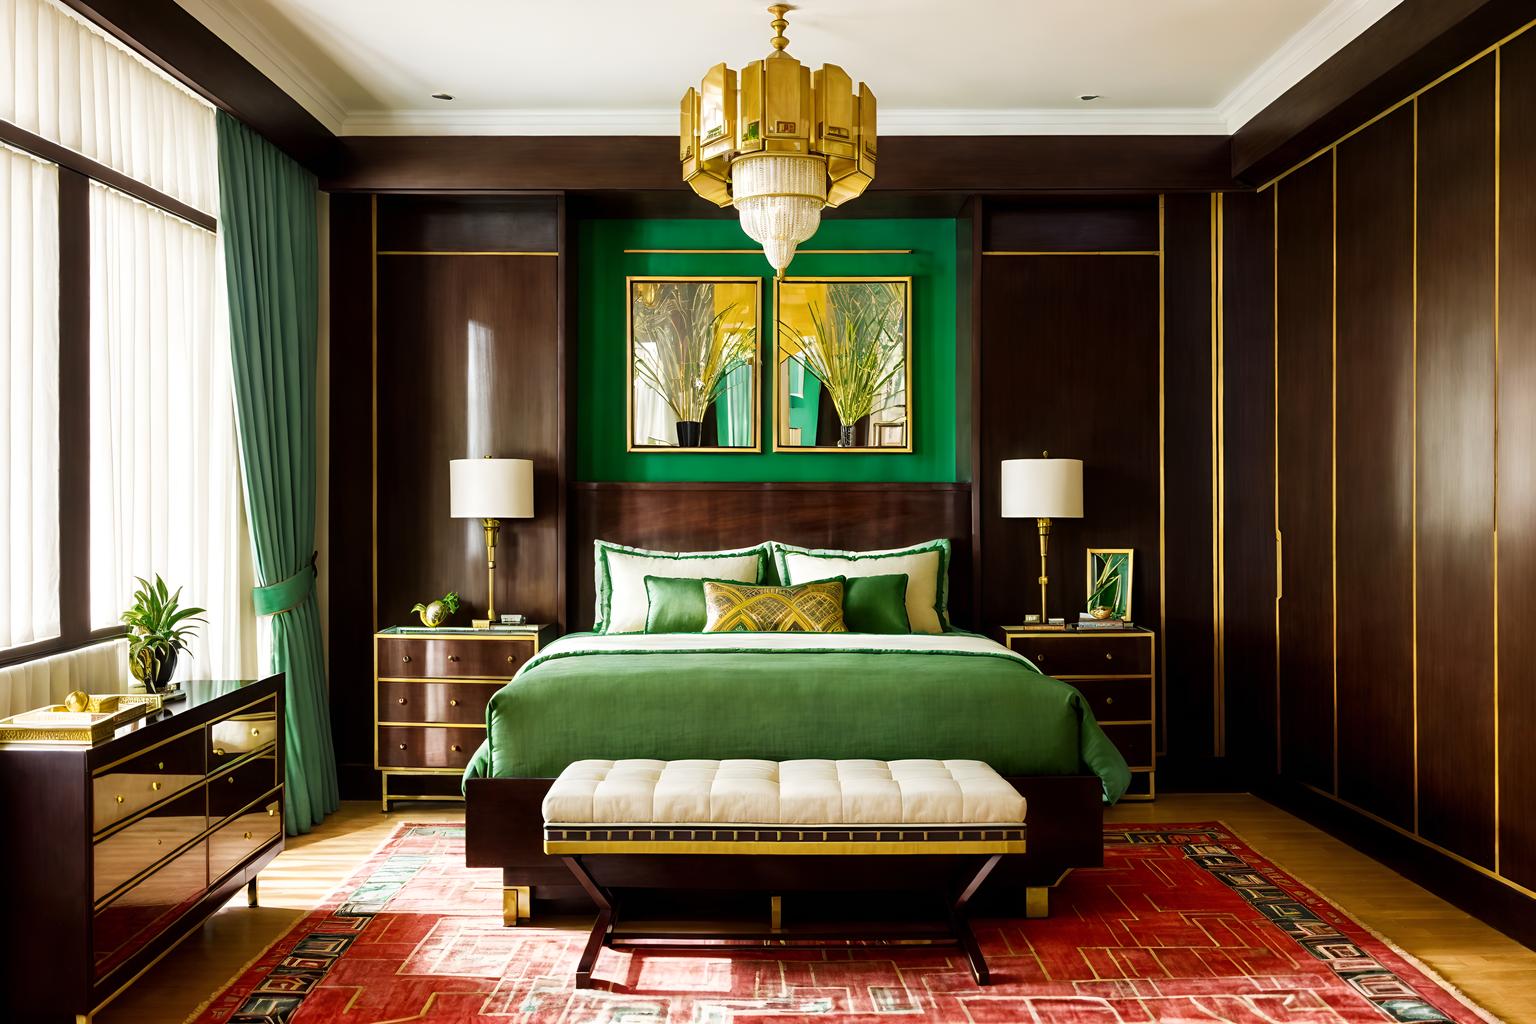 Art Deco-style Bedroom Interior With Plant And Dresser Closet And ...